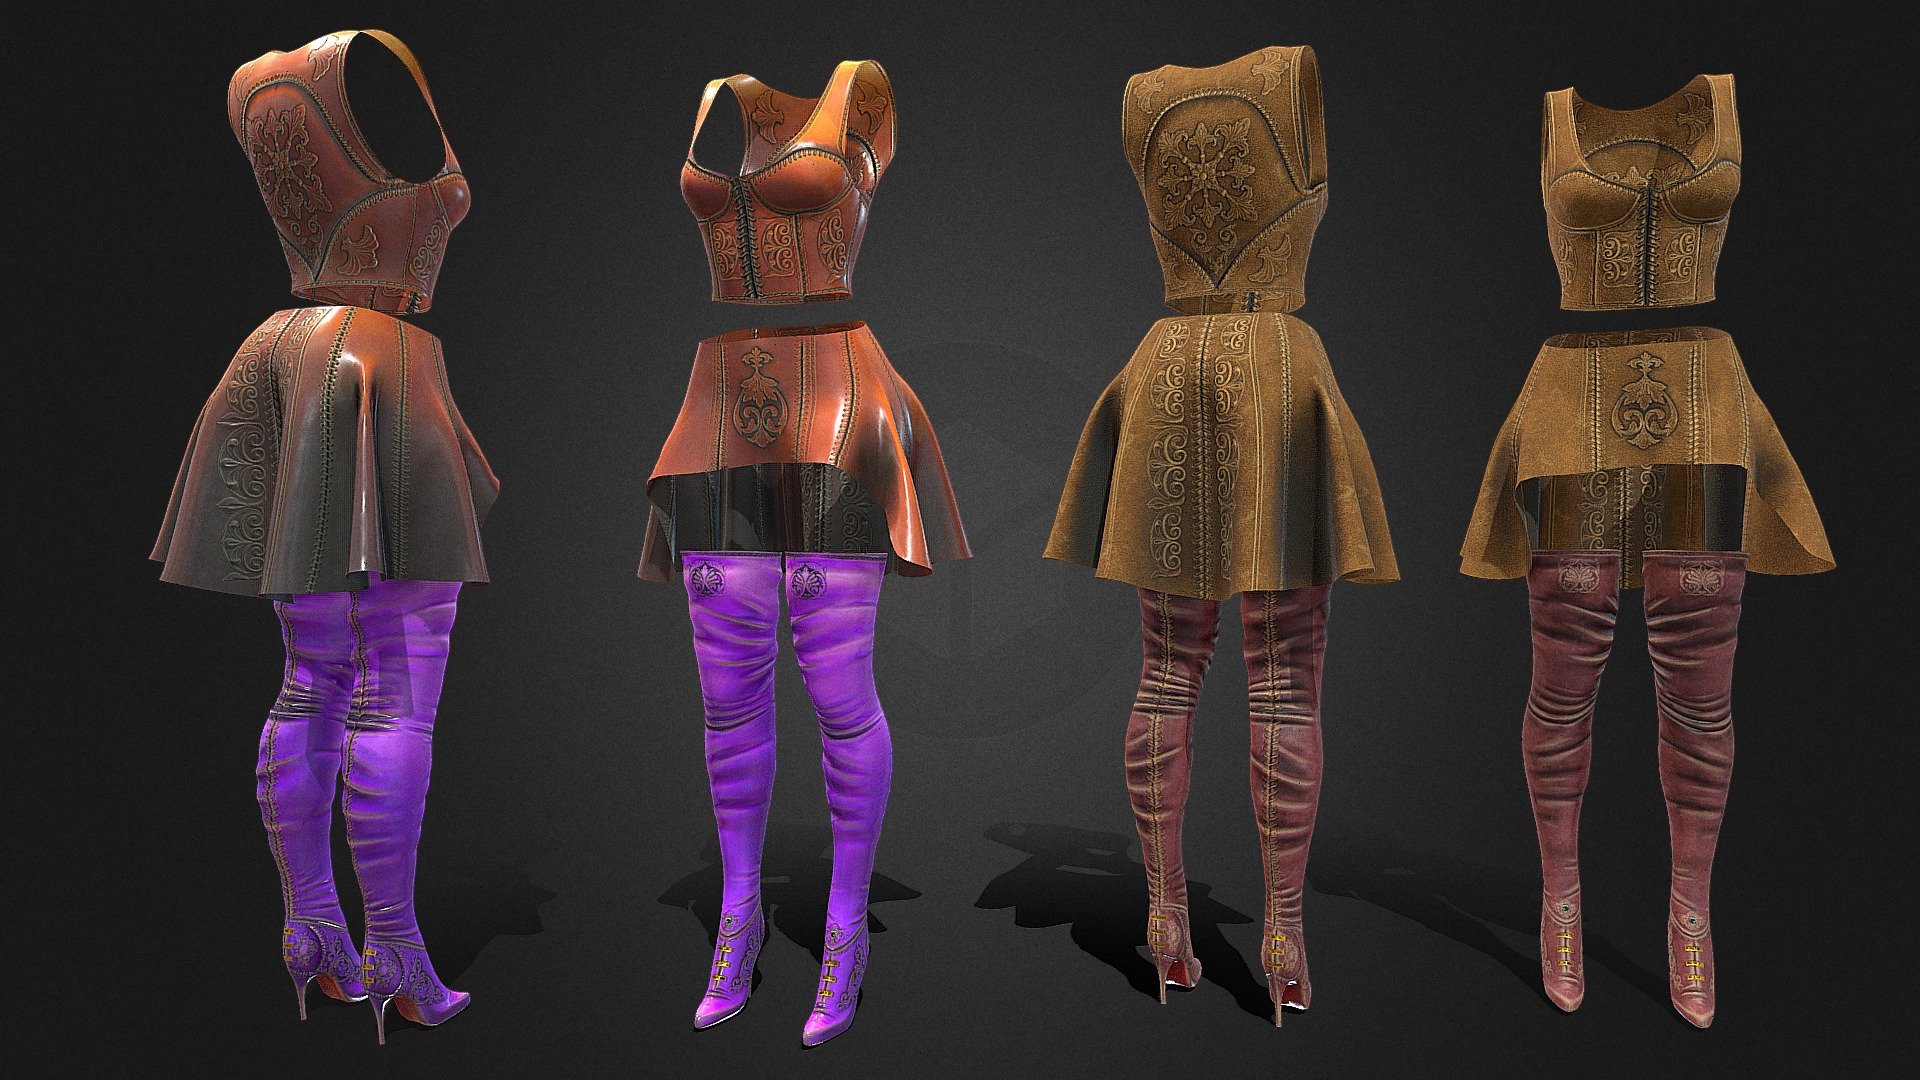 My goal was to create a modern armor infused with Enchian inspiration, embracing a stylized material and color palette. The concept embodies a powerful elven queen in the height of her reign, radiating strength. The armor seamlessly fuses stylized leather and gold components, thoughtfully tailored to accentuate her silhouette while amplifying her combat capabilities 3d model